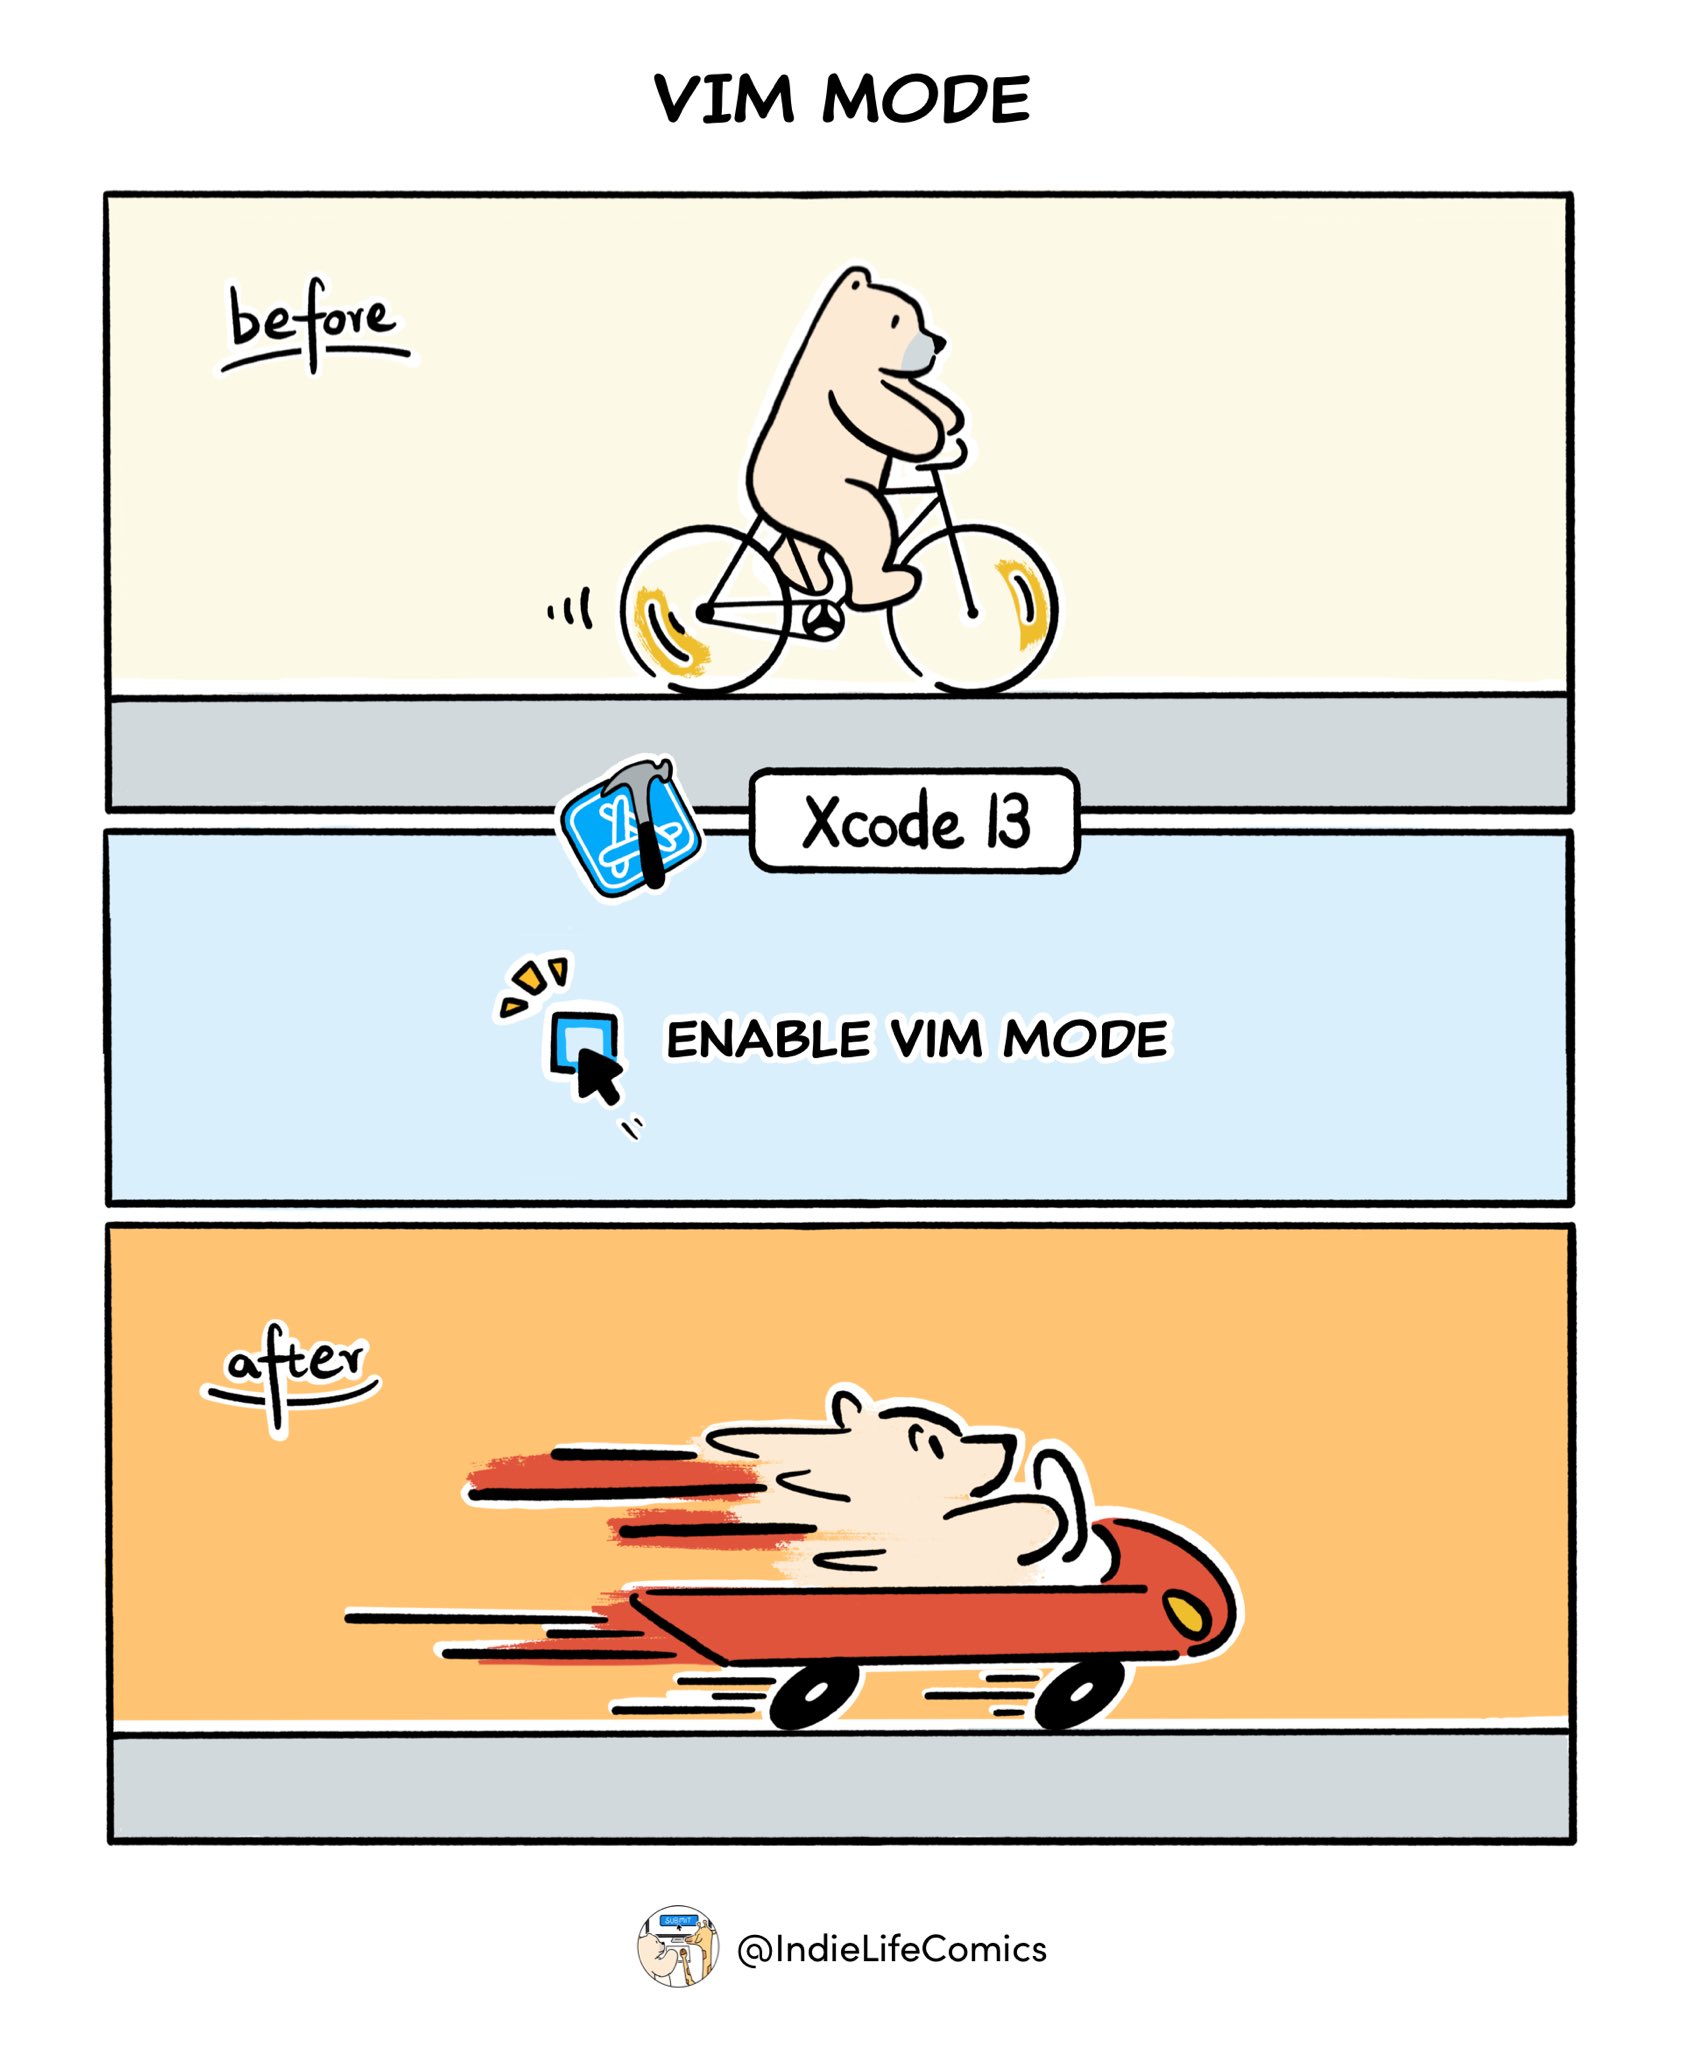 A comic about Vim. The bear rides slowly until Vim mode is enabled.